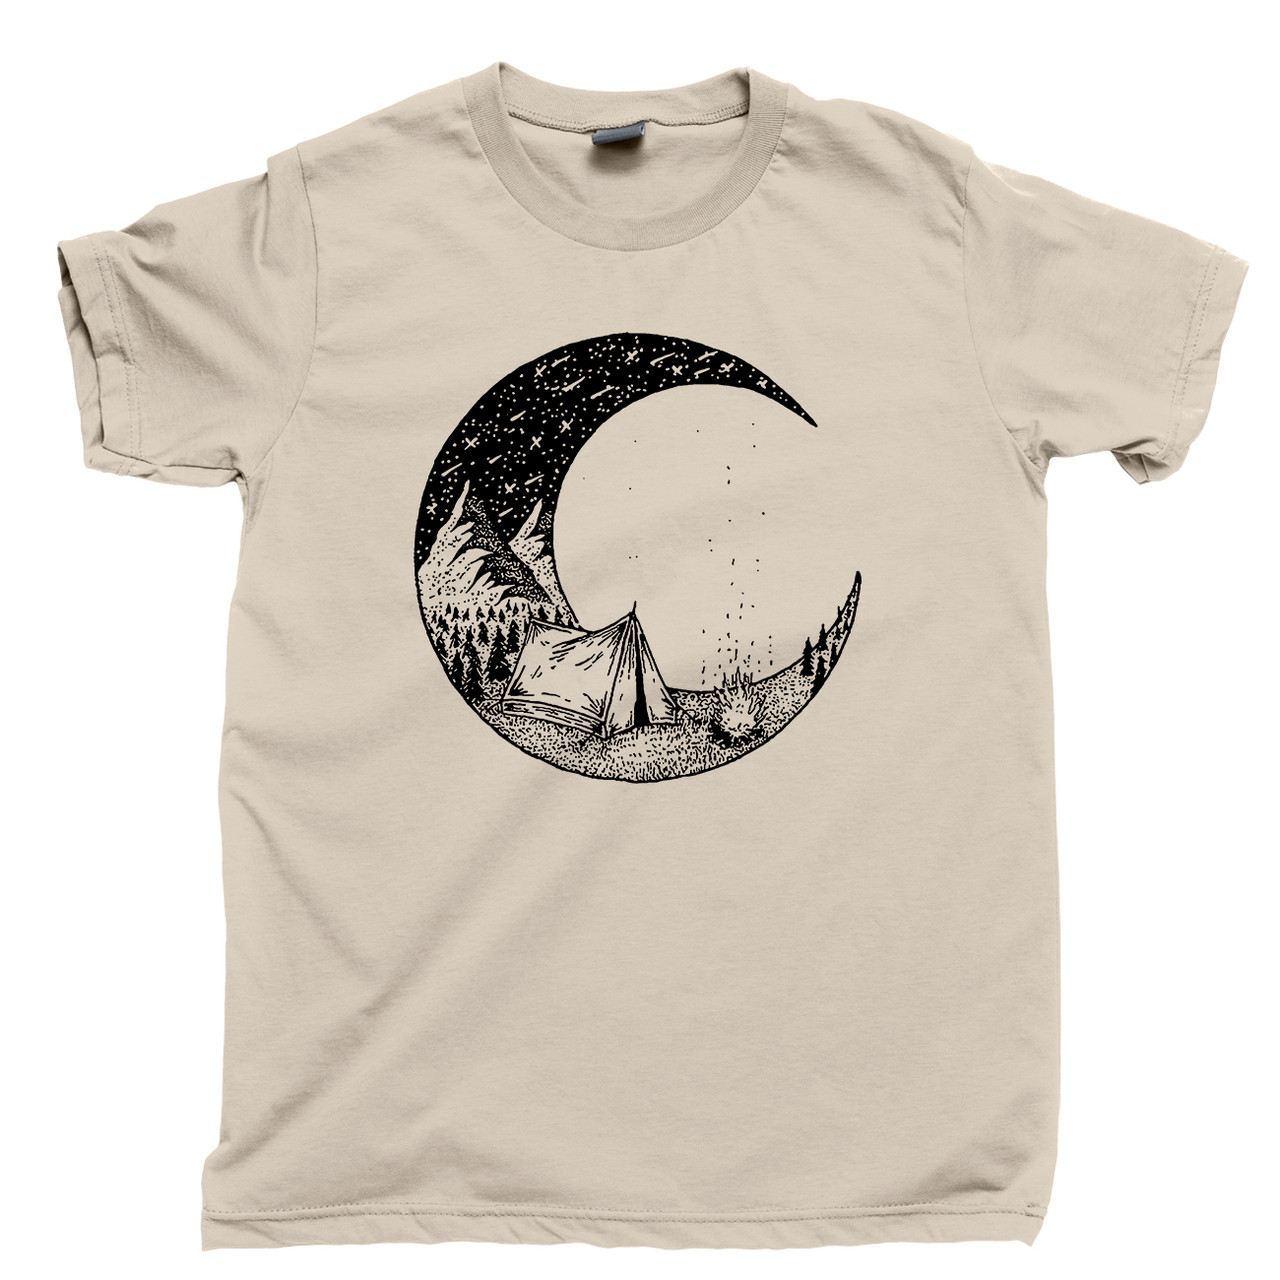 Camping Under The Moon And Stars T Shirt - The Great Outdoors Mountain  Hiking & Bonfires Tee